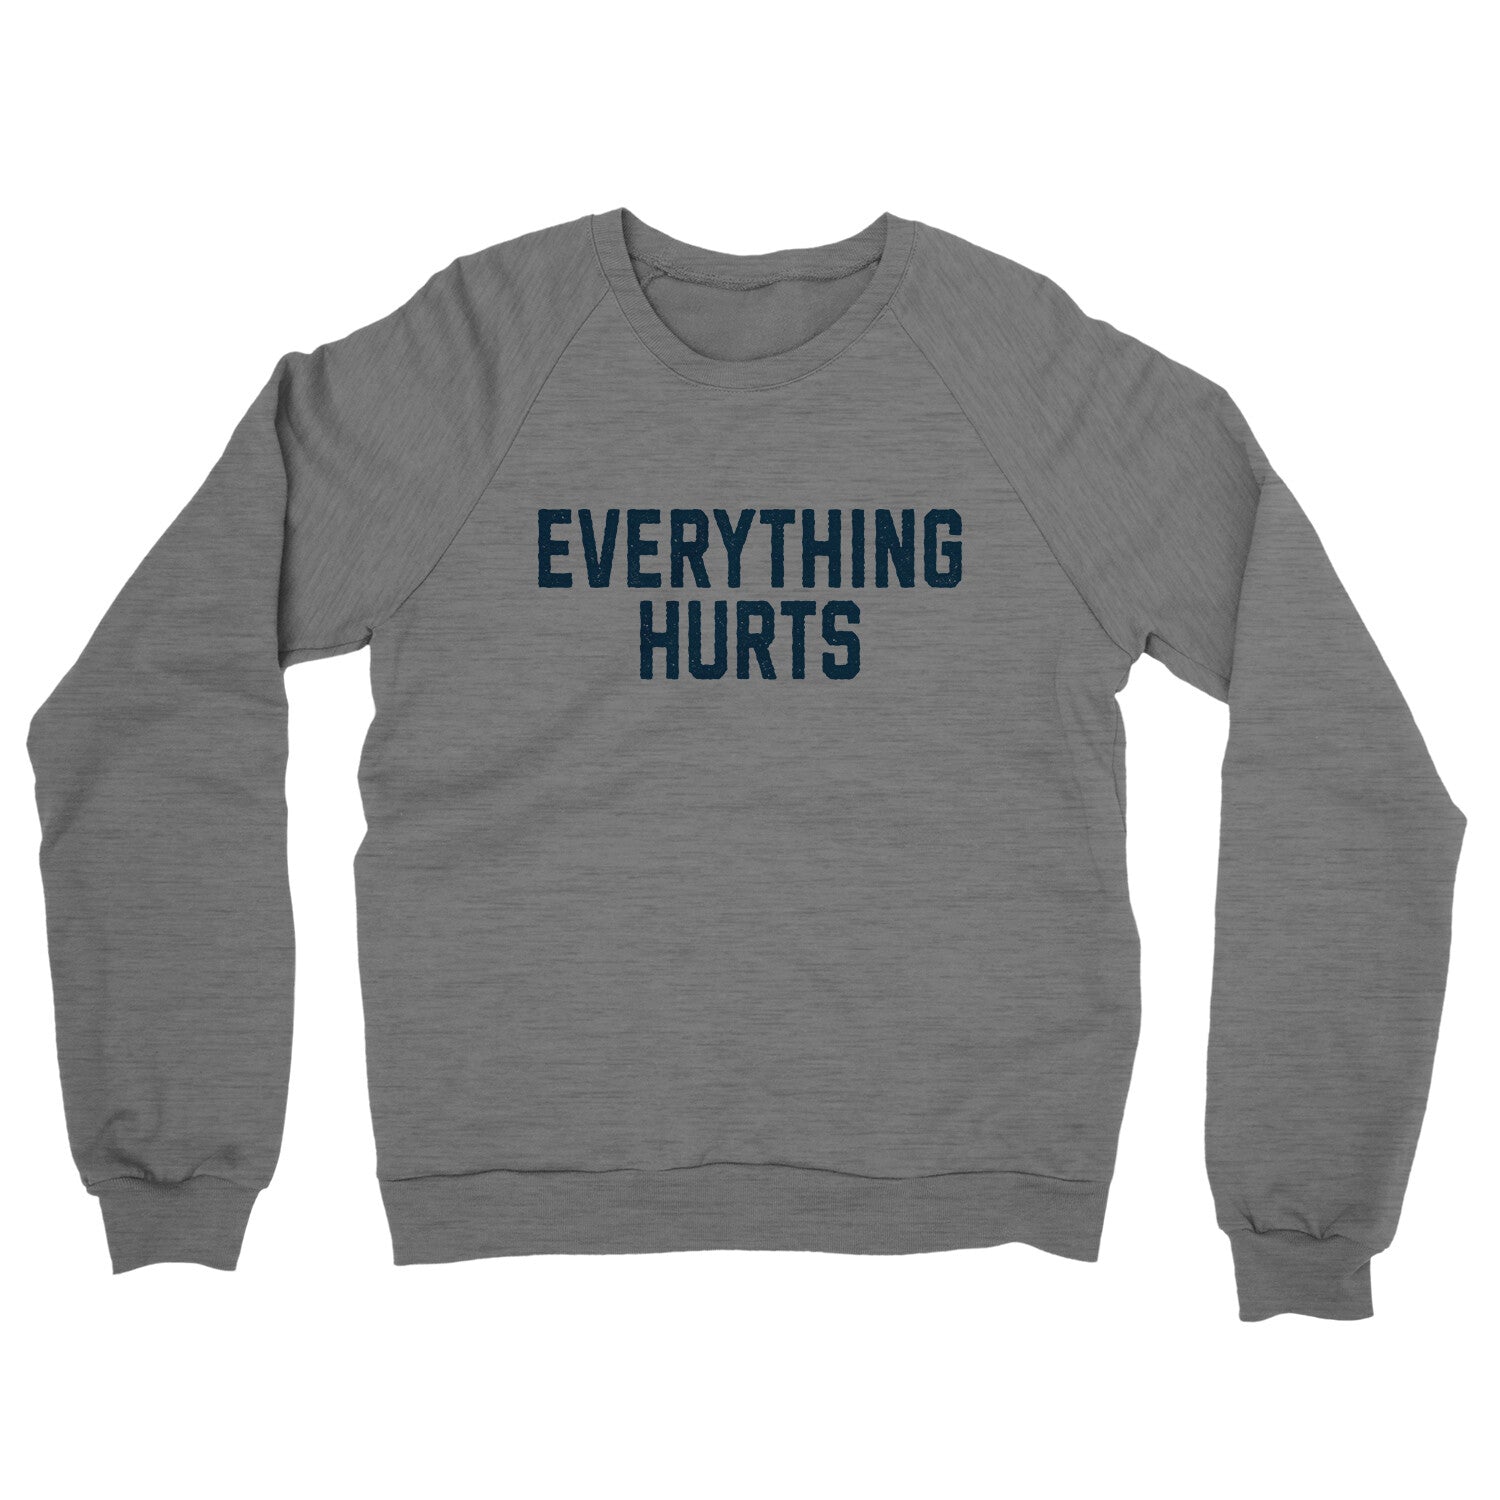 Everything Hurts in Graphite Heather Color